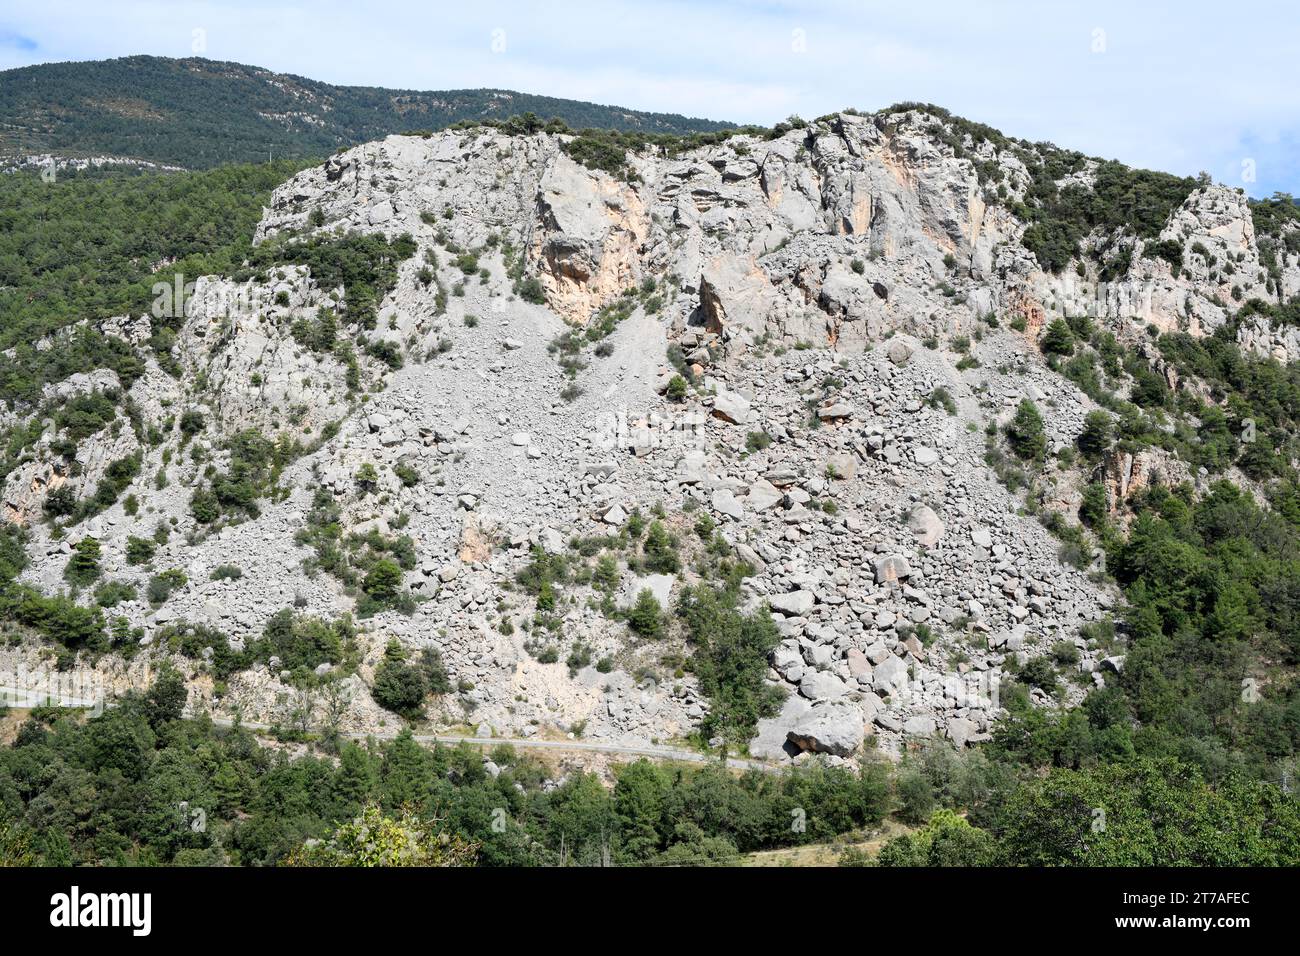 Shell-shaped erosion scarp. This photo was taken in Cambrils, Odèn, Lleida, Catalonia, Spain. Stock Photo